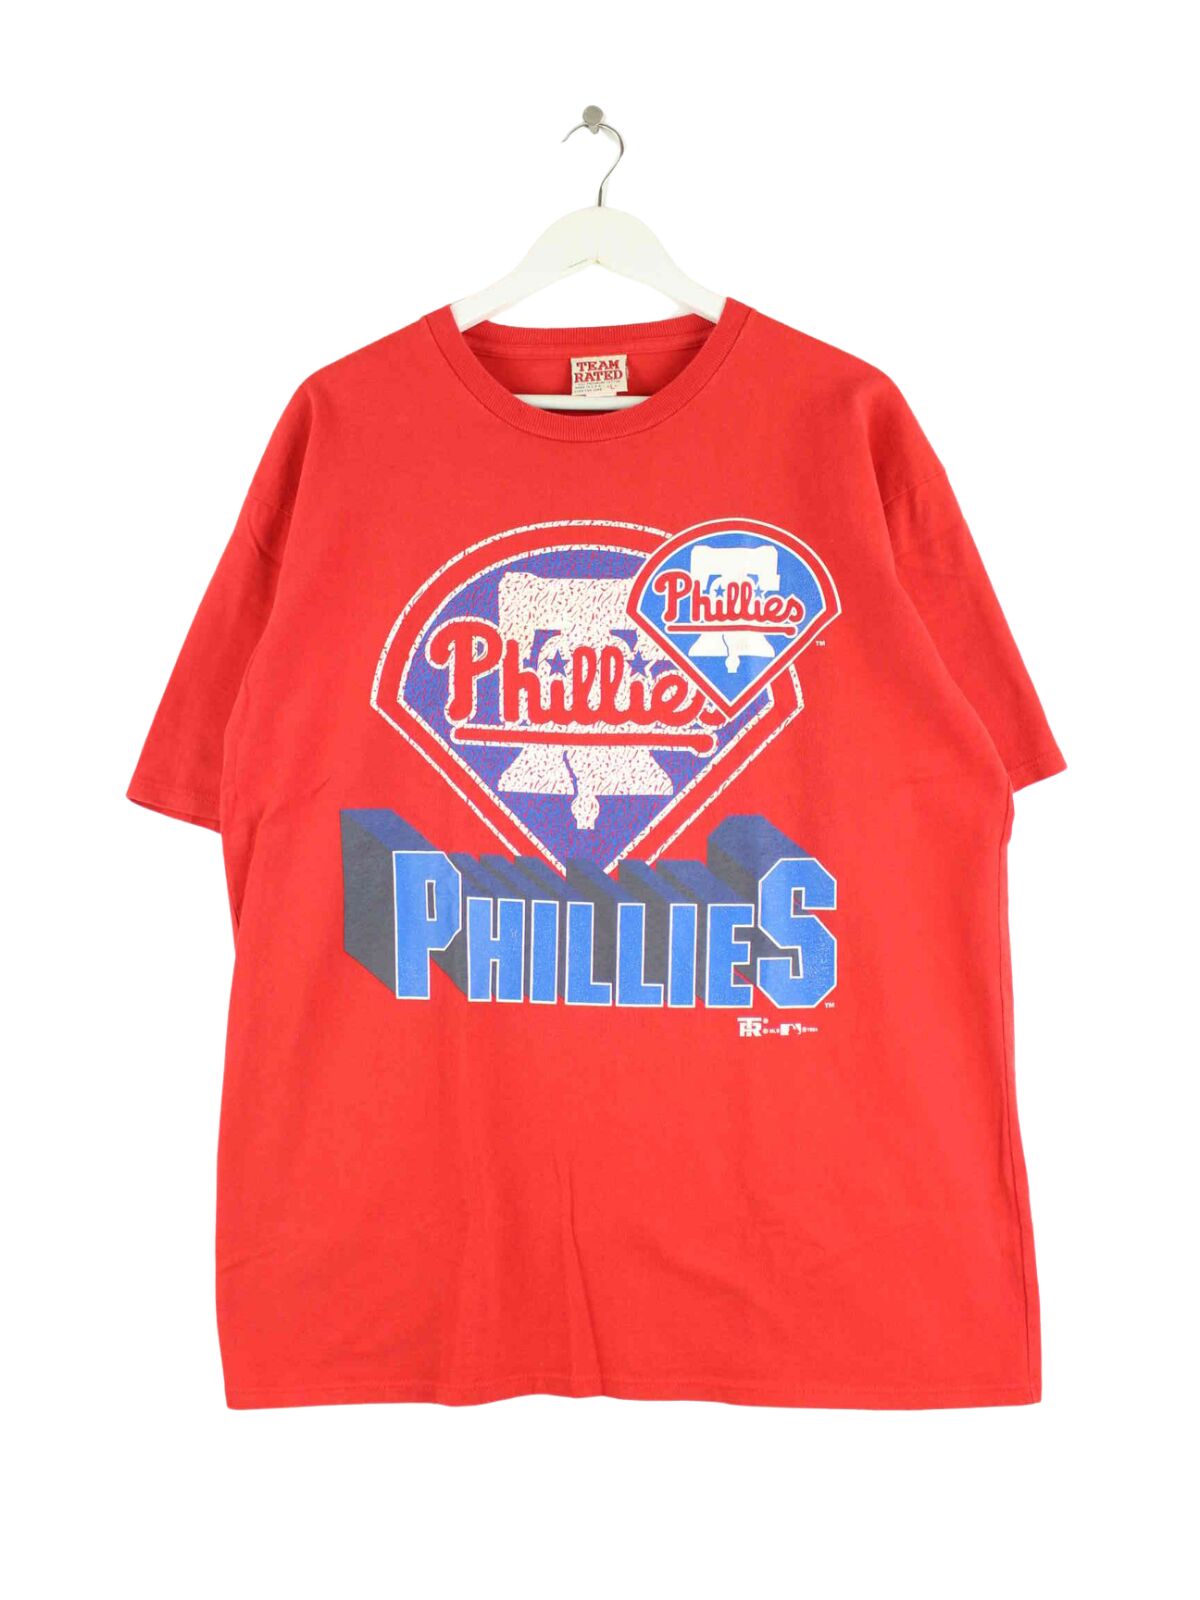 Team Rated x MLB 1994 Vintage Phillies Print T-Shirt Rot L (front image)